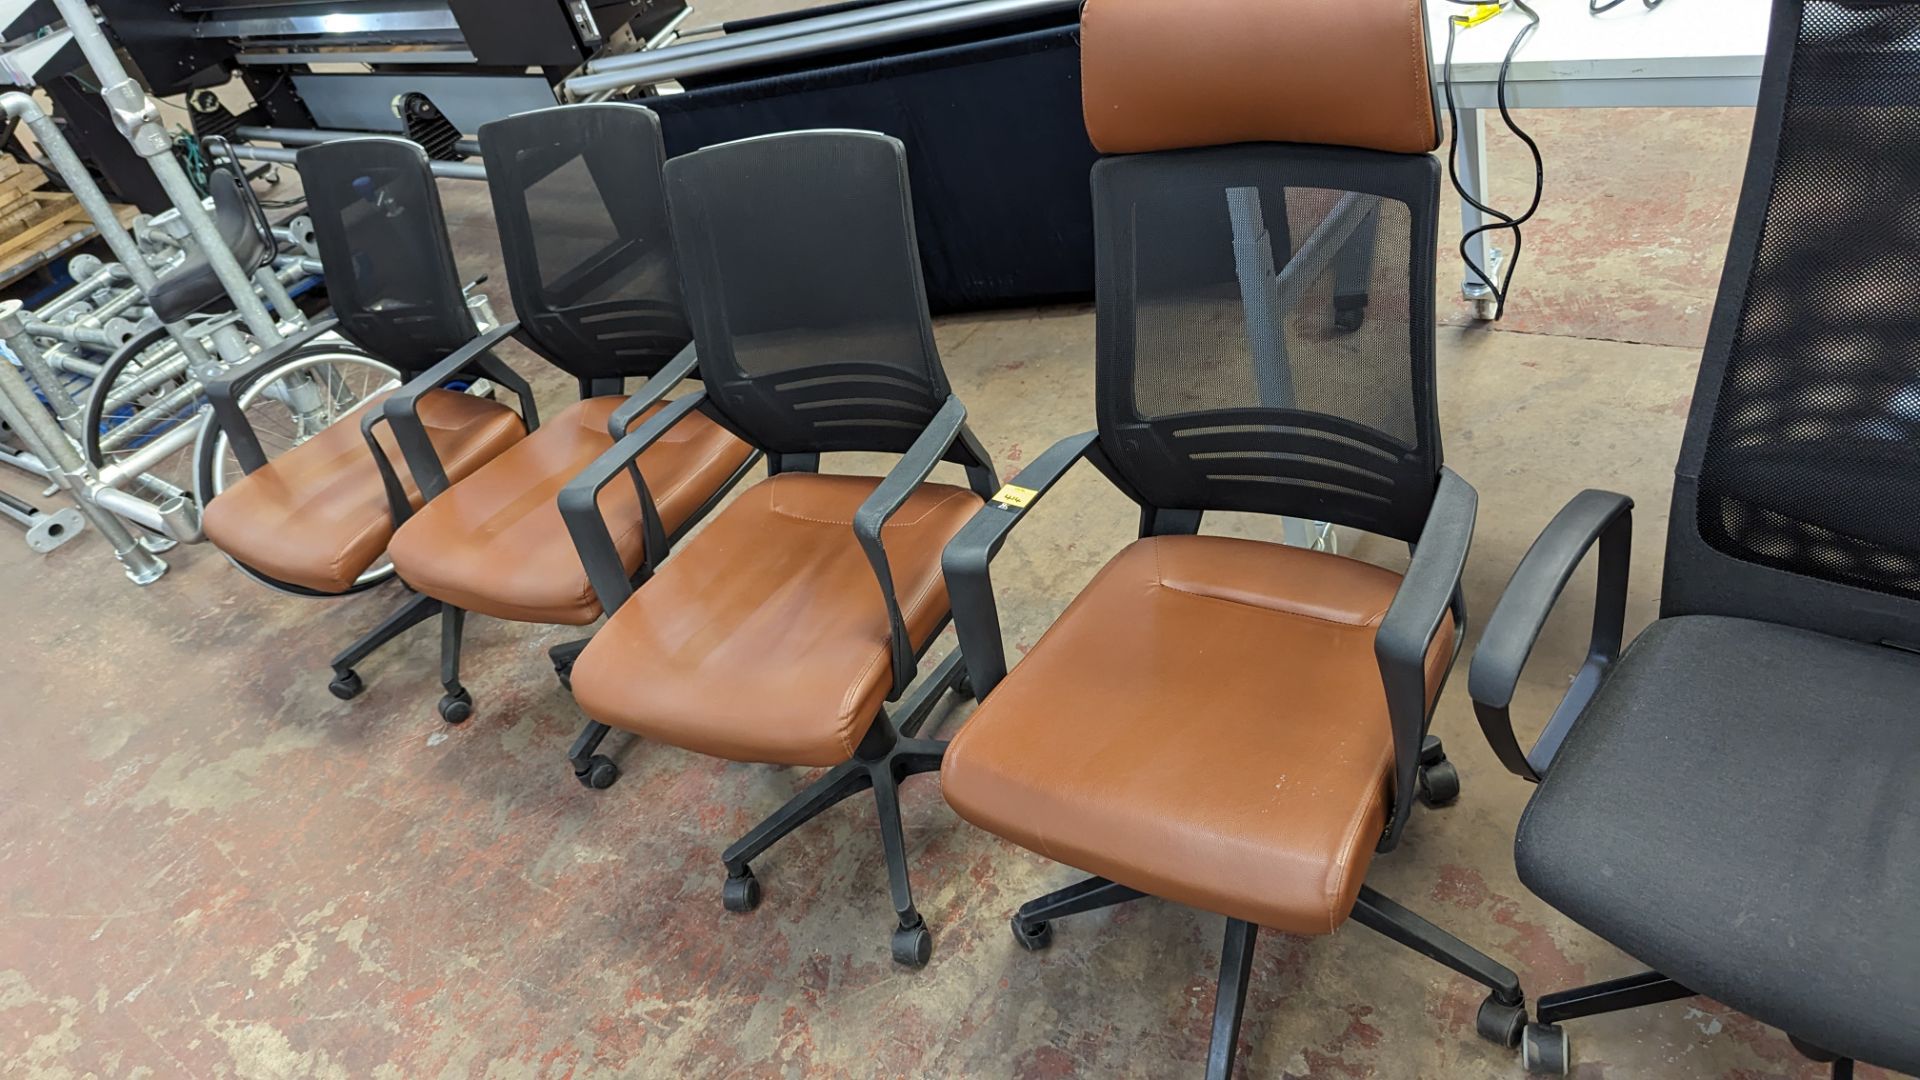 4 off matching modern mesh back chairs with brown leather/leather look seat bases, one of which has - Image 2 of 10